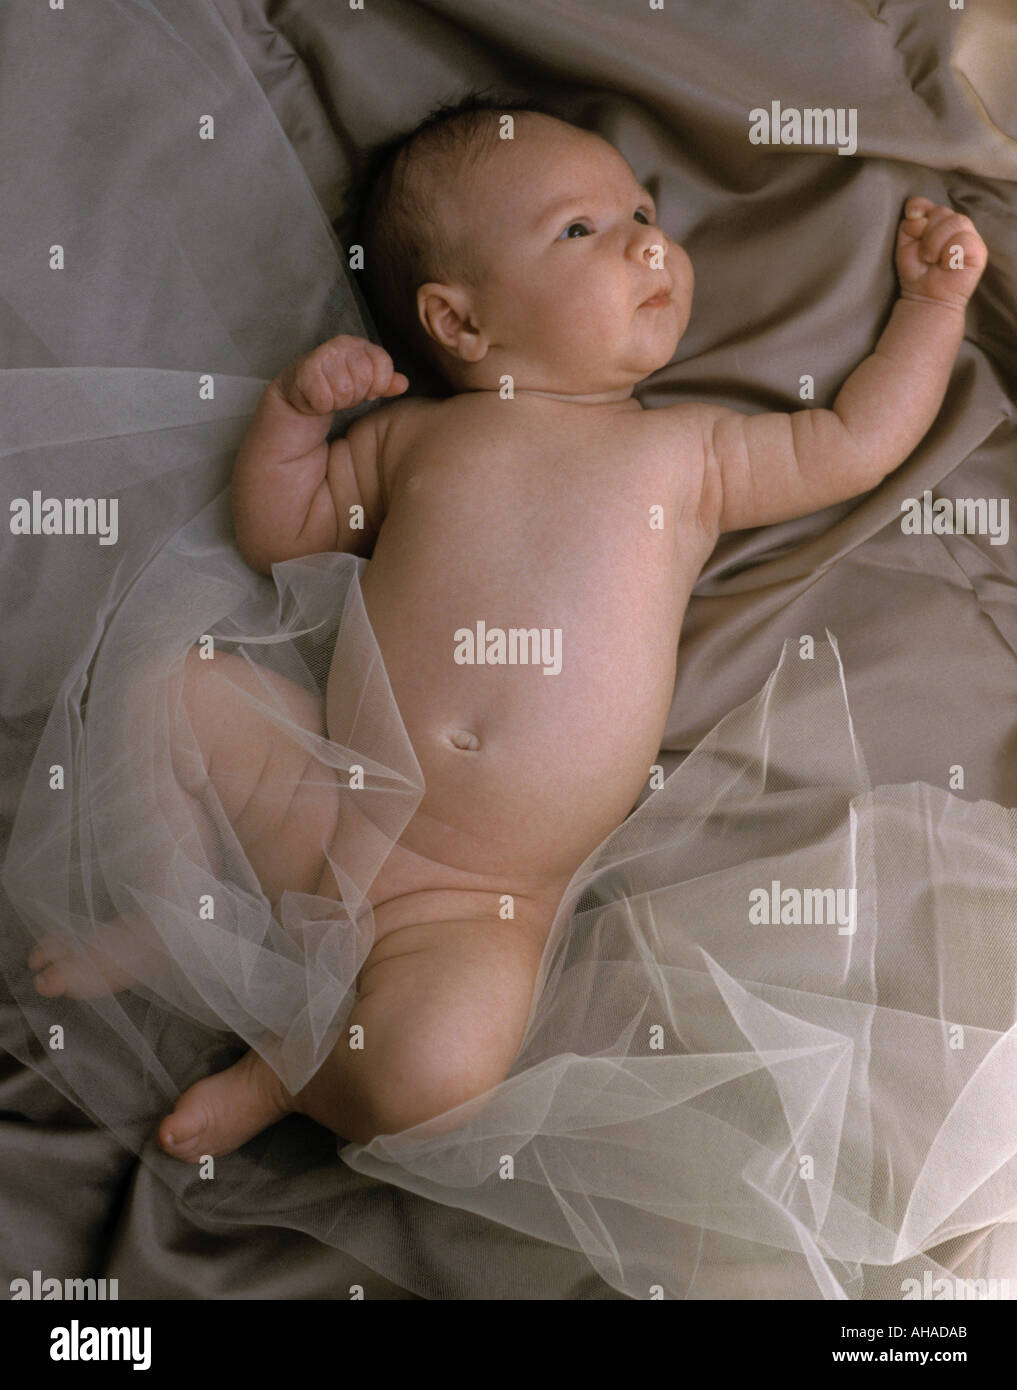 Baby with Lace Stock Photo